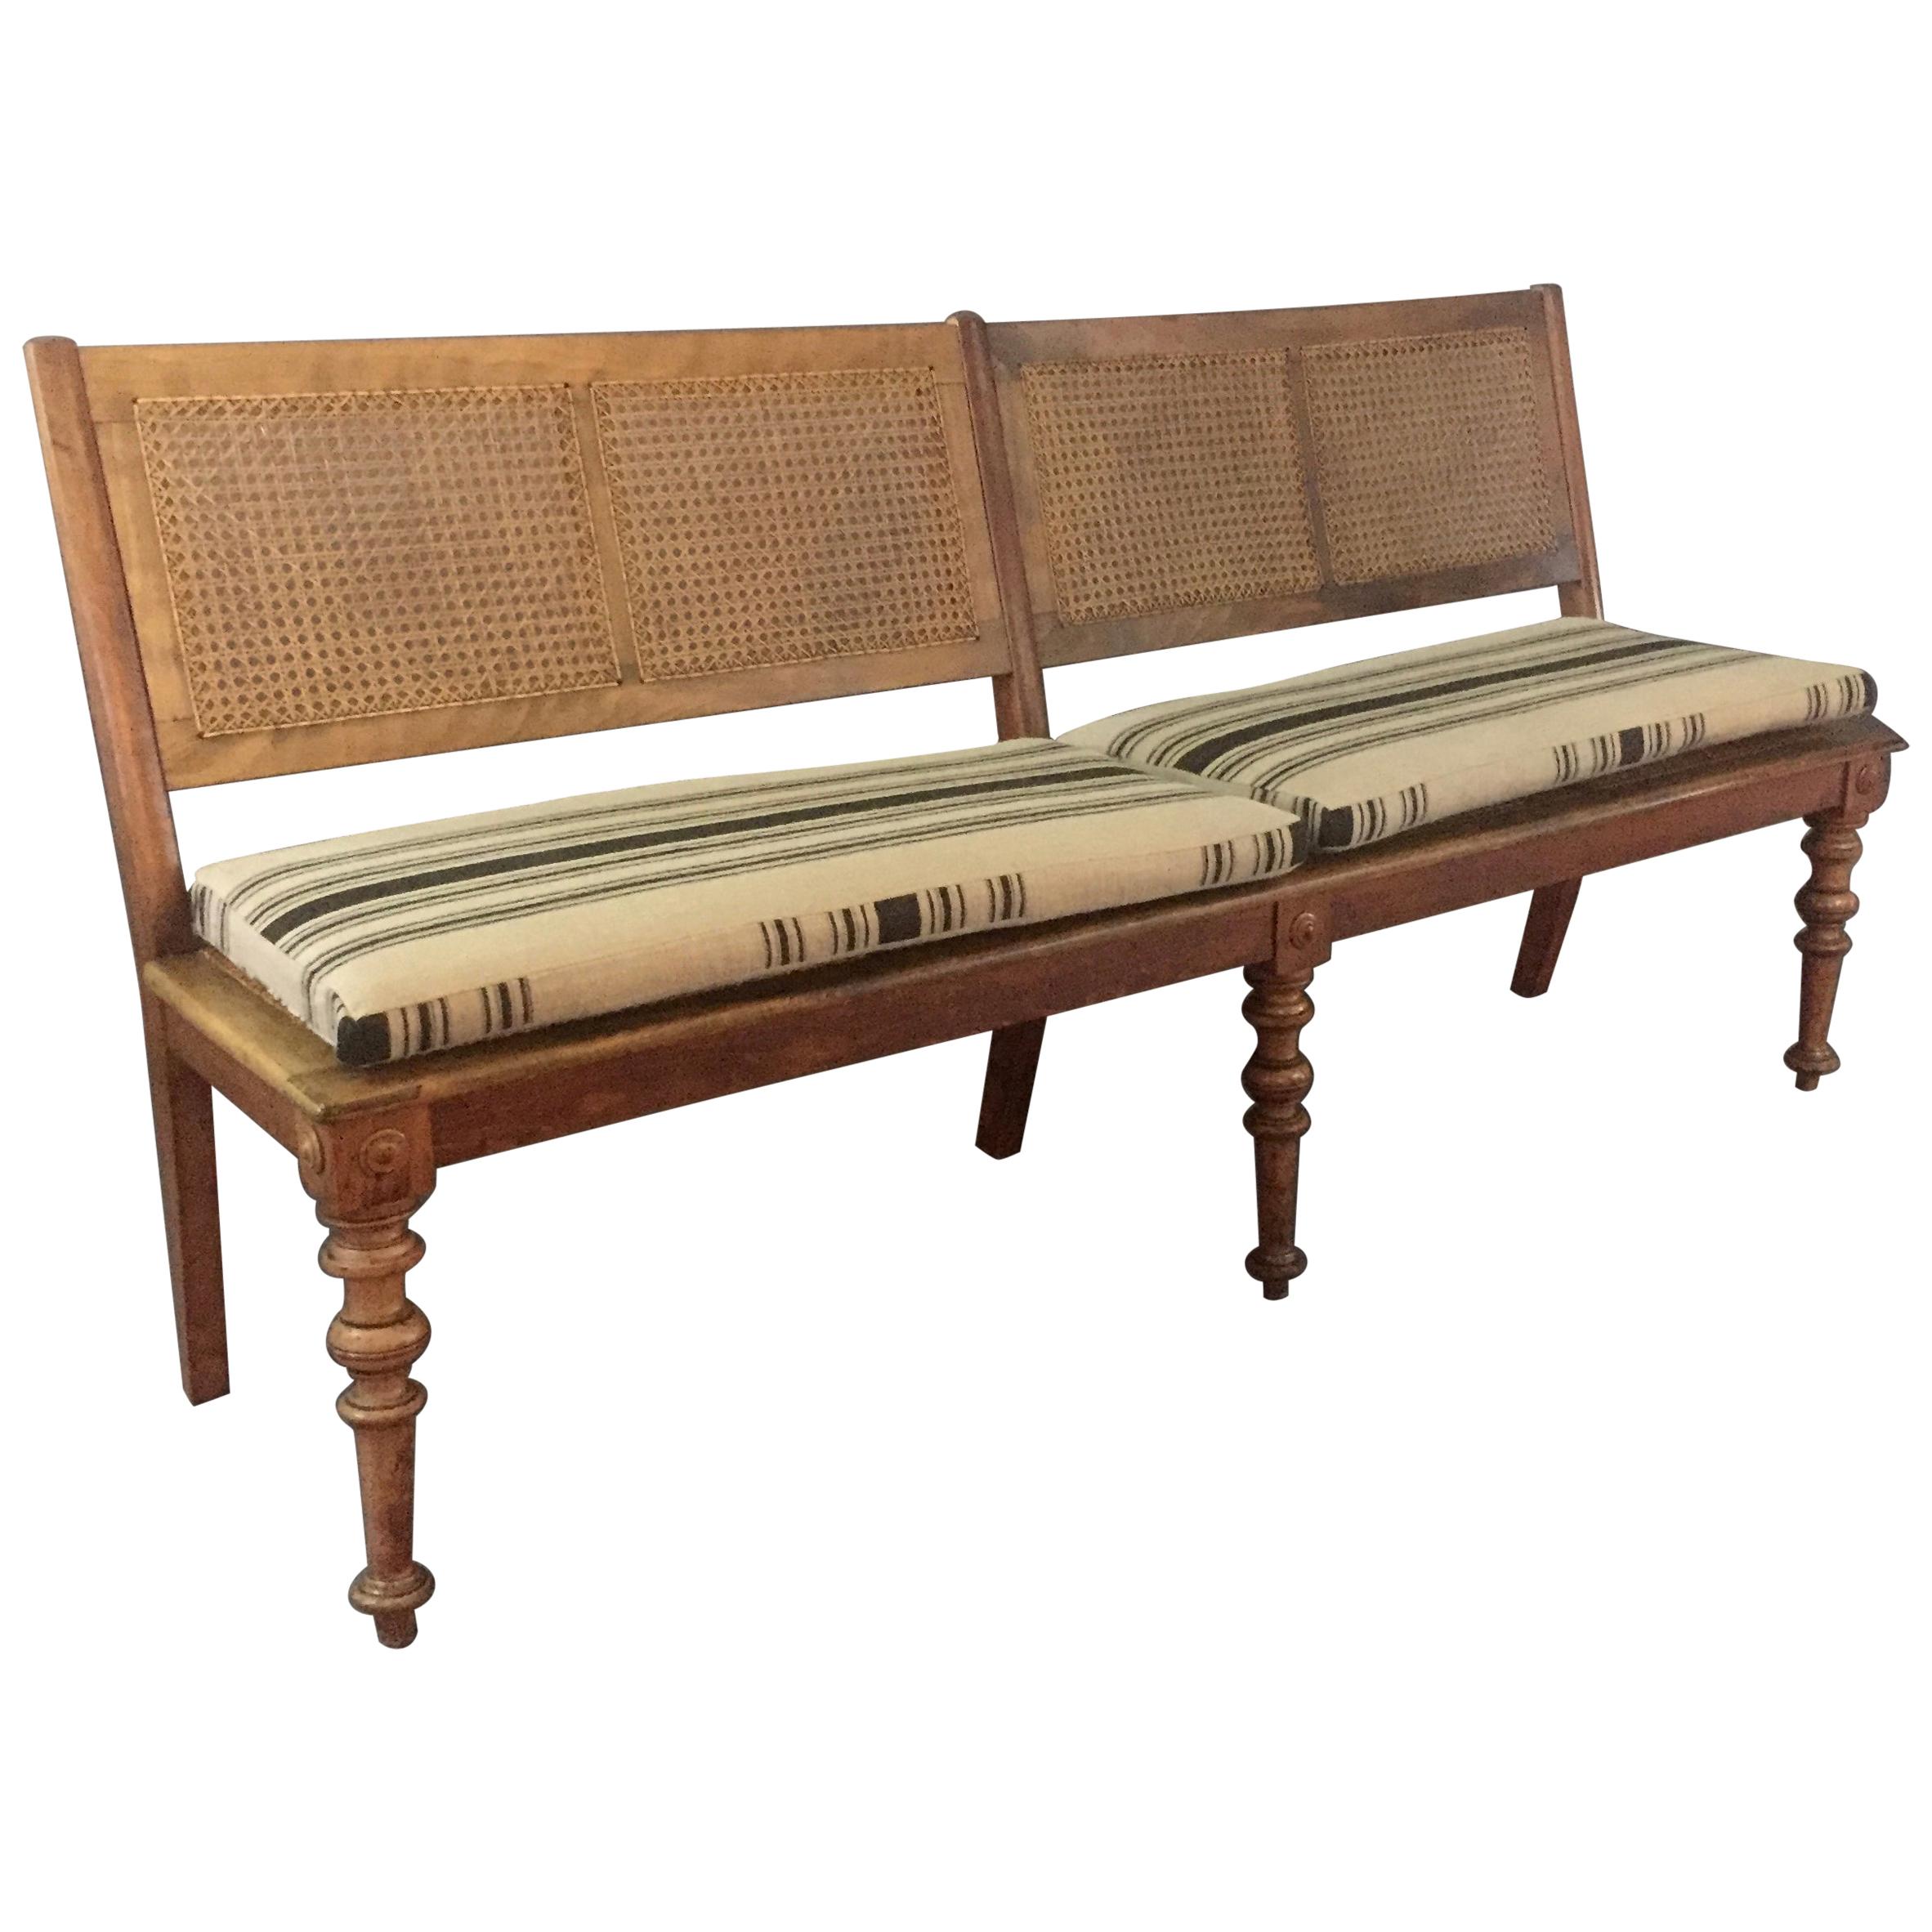 Beechwood Long Bench with French Caning, Linen Covers, circa 1915 For Sale